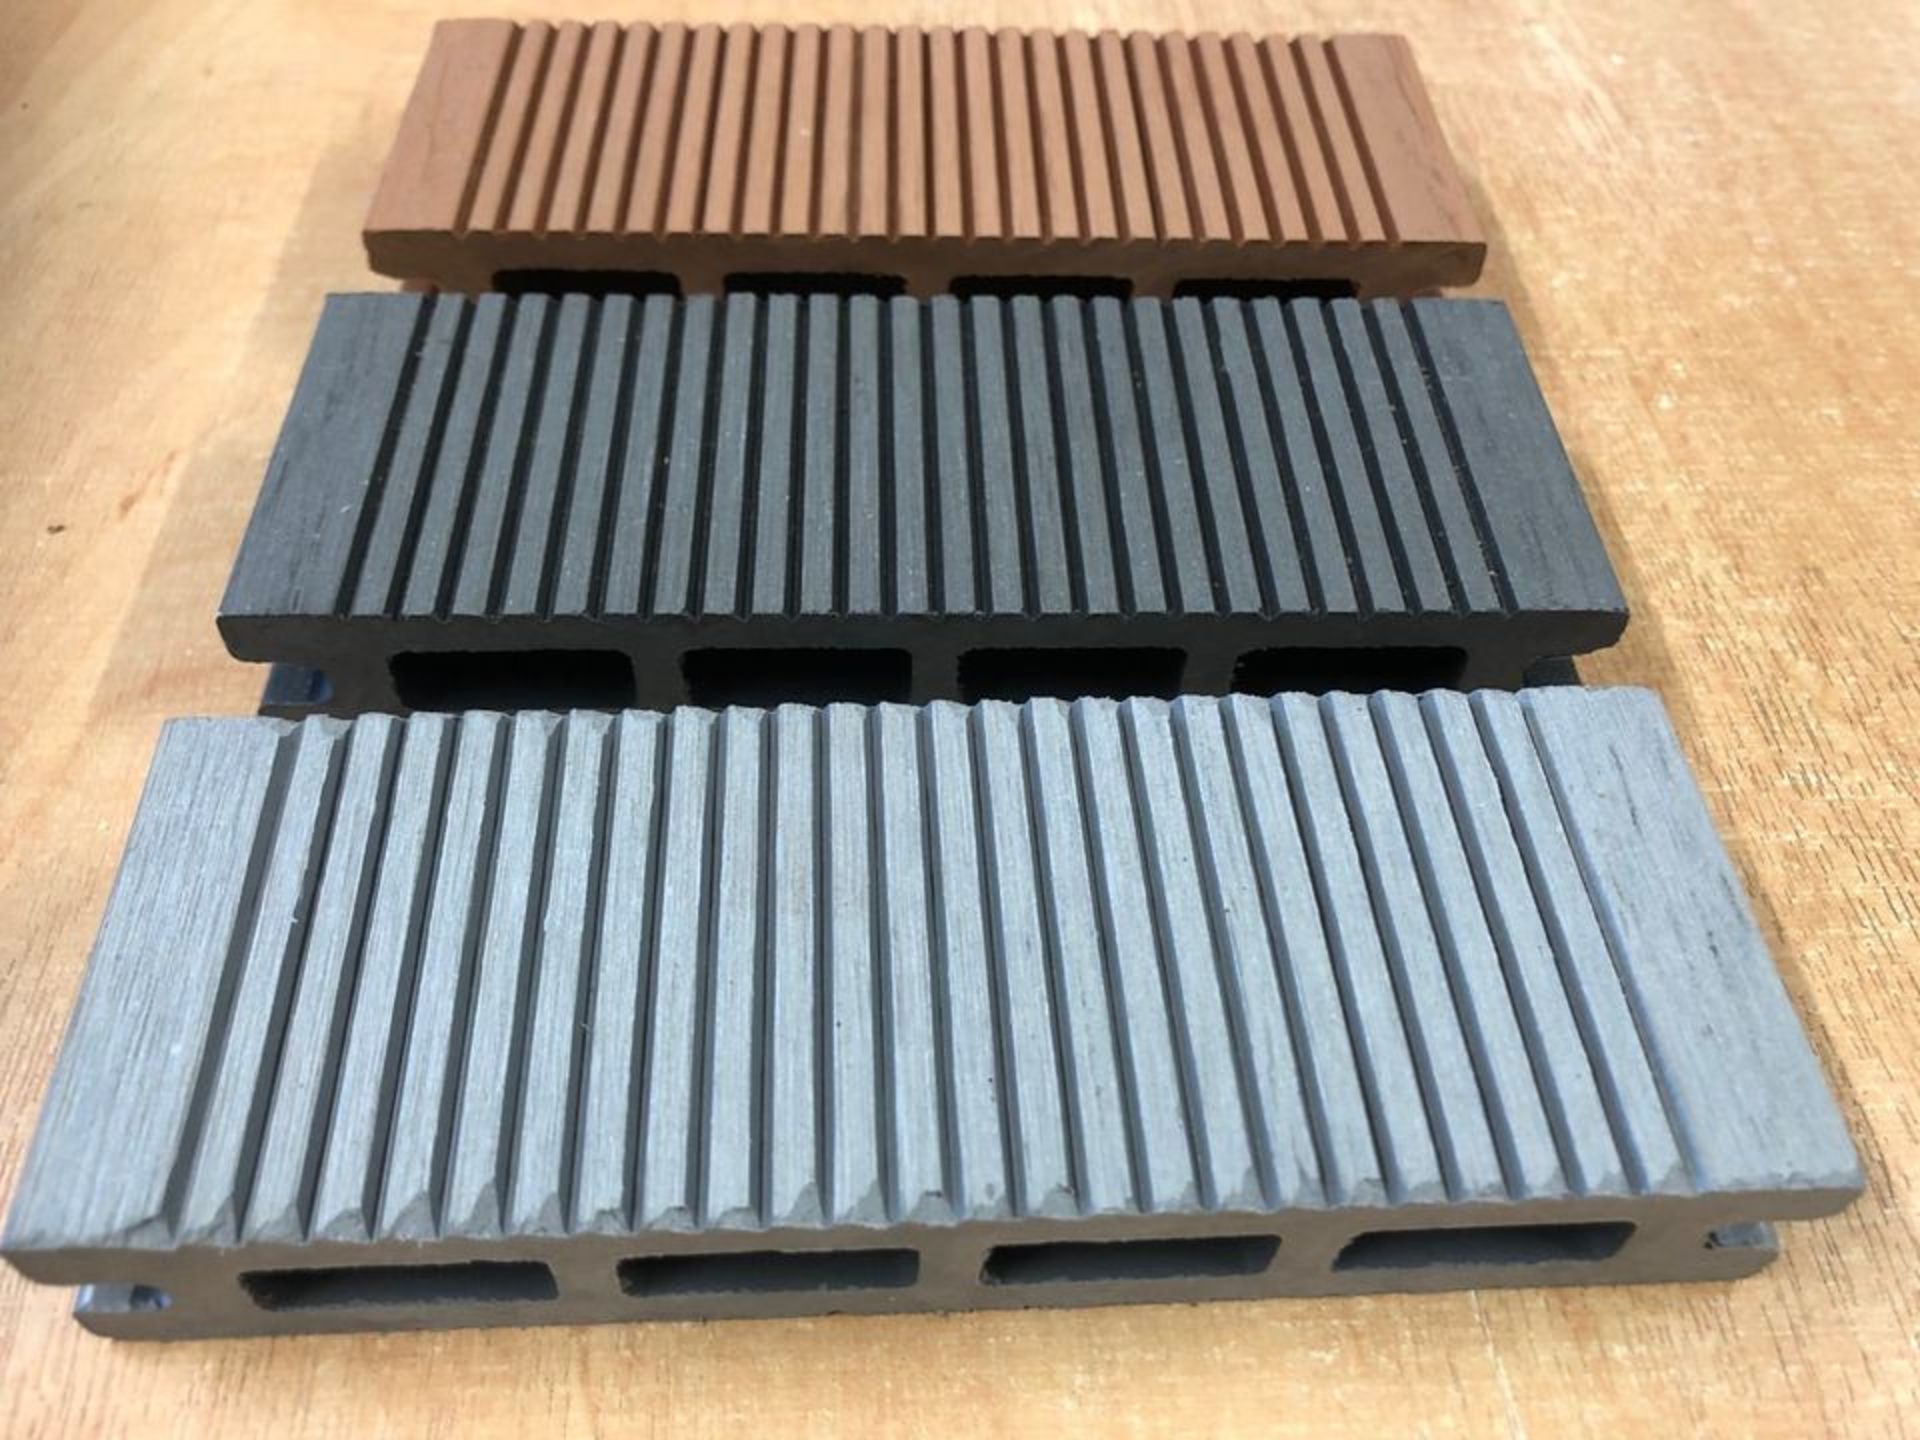 * Complete Dark Grey WPC decking Kit 2.9m x 2.9m includes joists - clips - decking - screws & fixing - Image 3 of 5